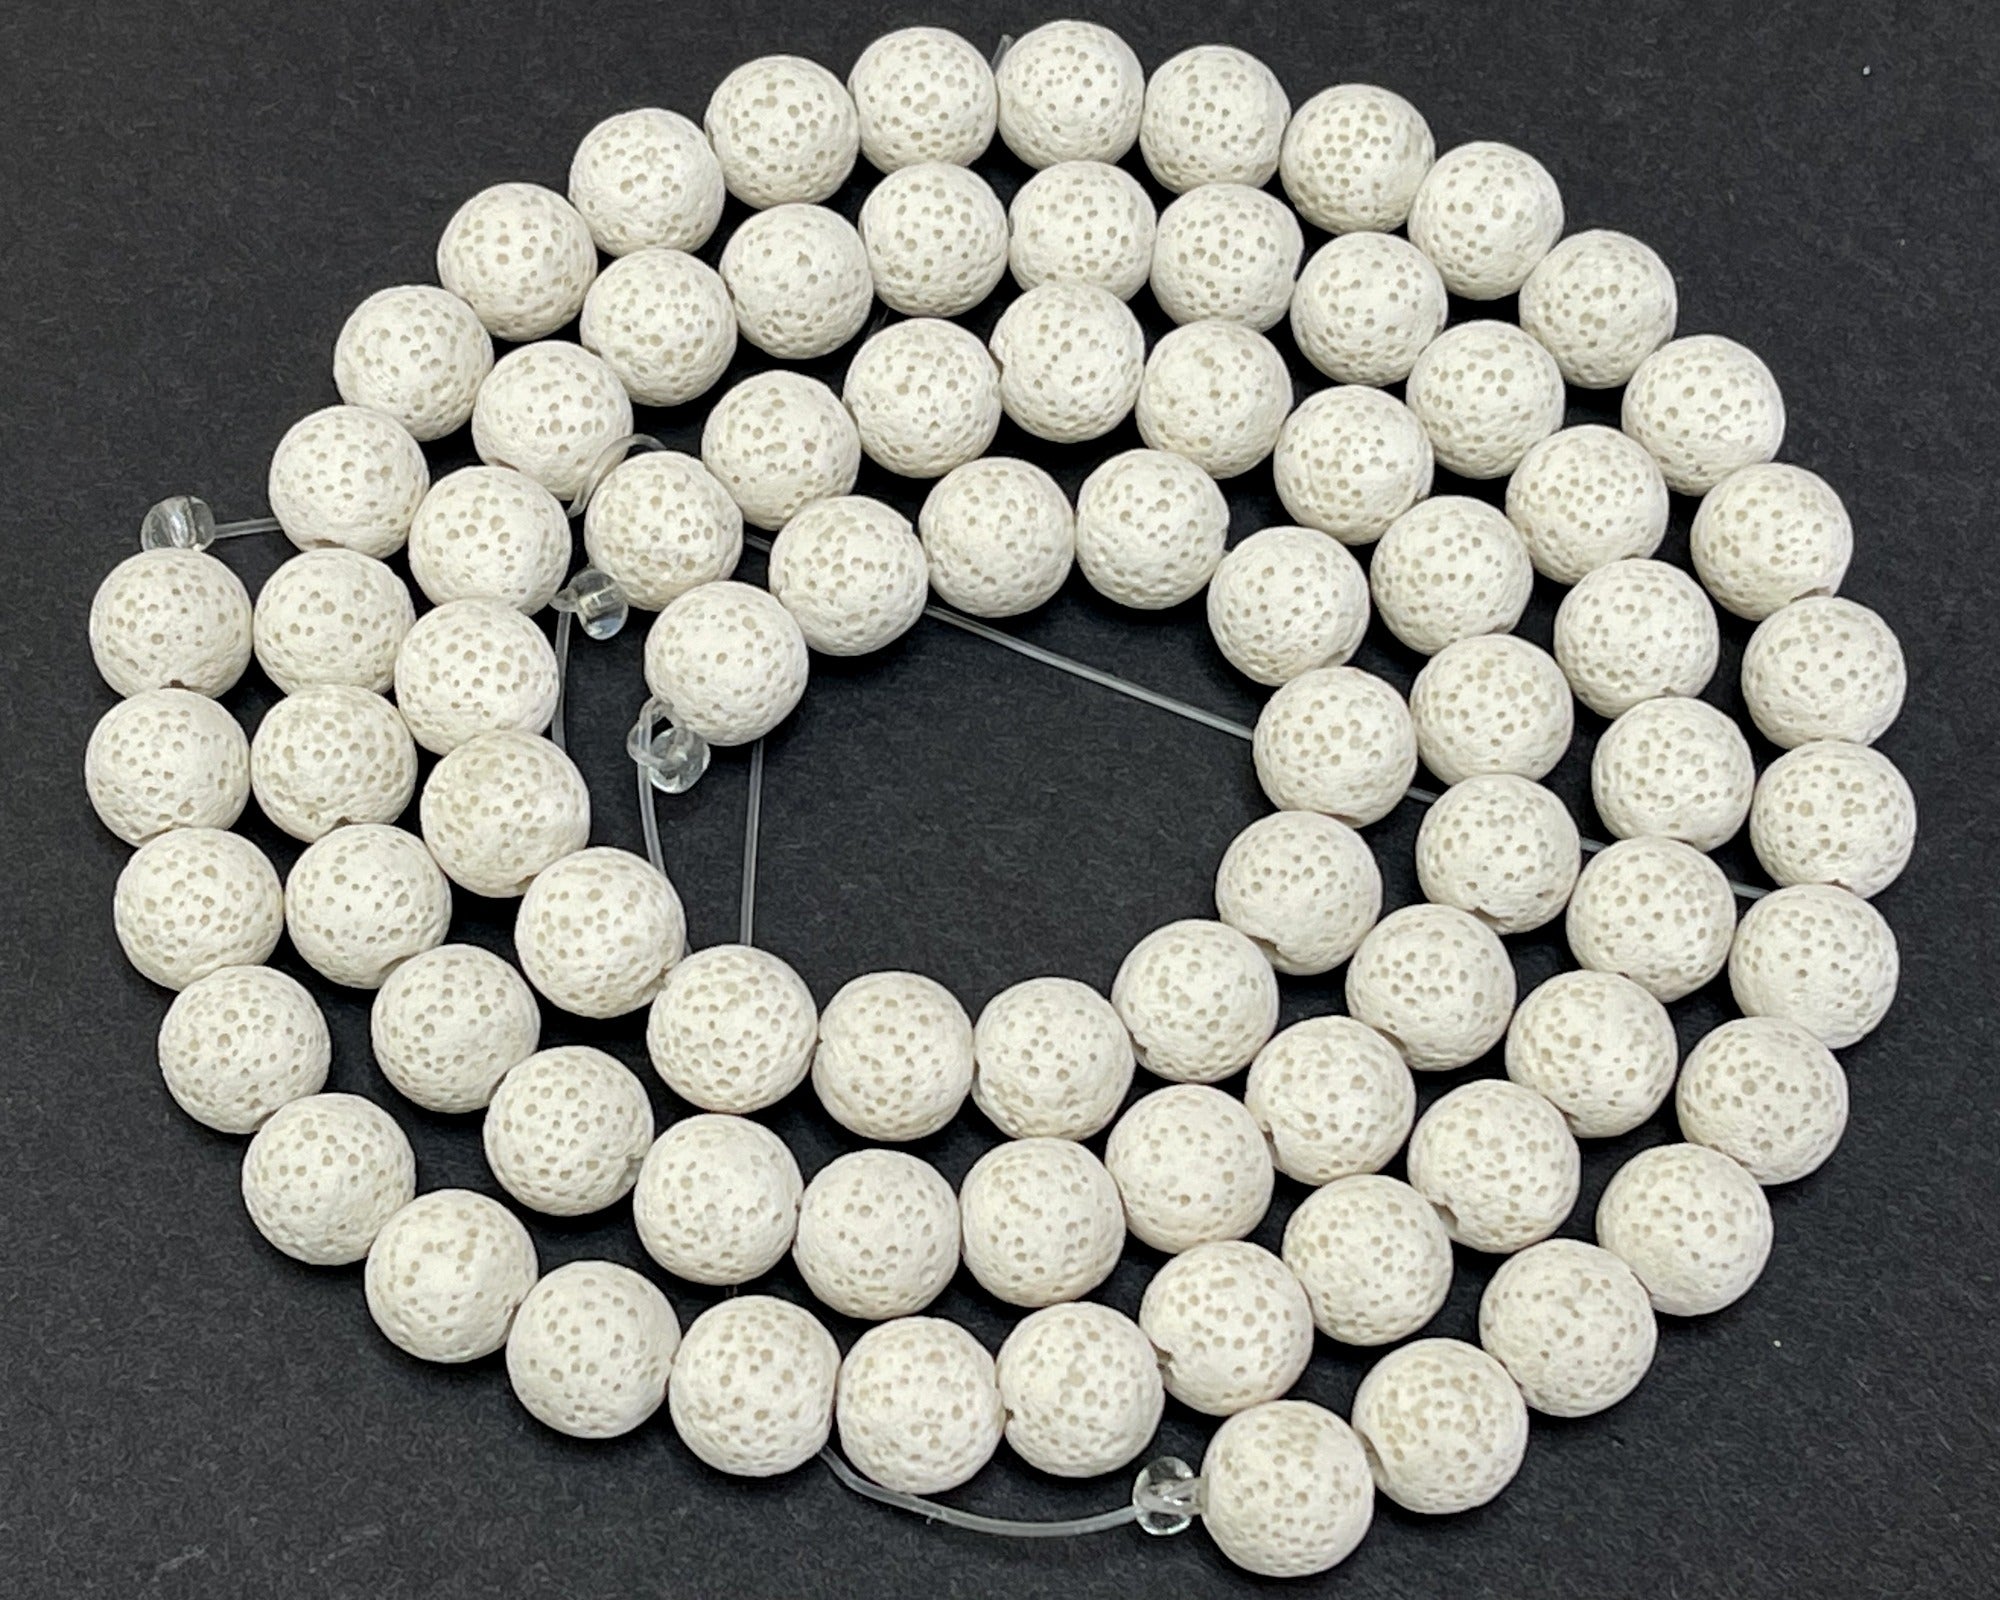 Lava White 6mm 8mm 10mm round natural volcanic lava diffuser beads 16" strand - Oz Beads 